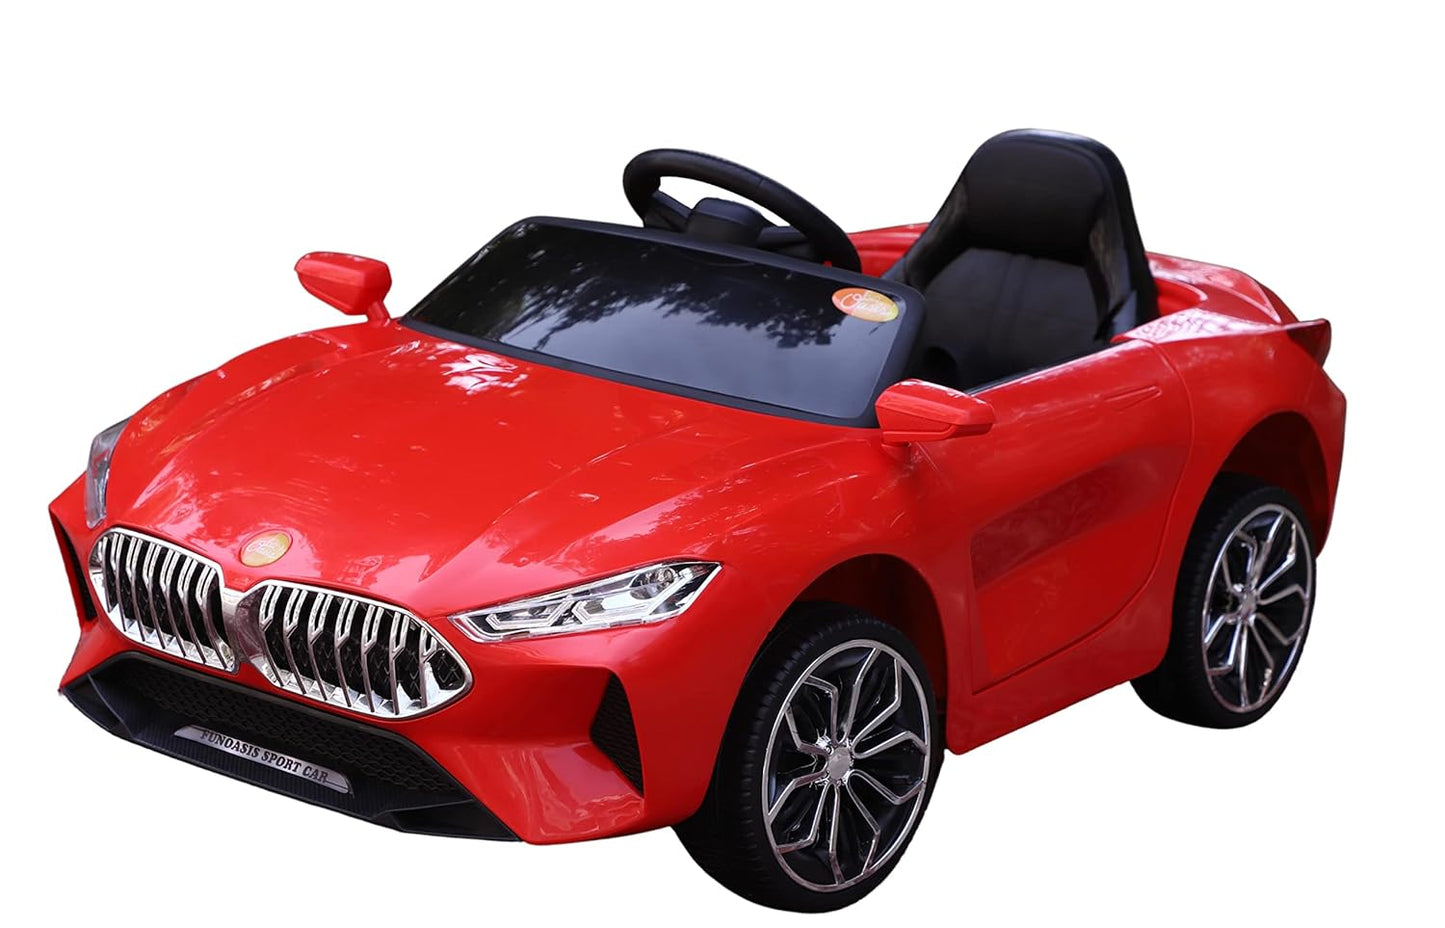 Letzride Ride on for Kids with Battery with Music System (RED) Age 1 to 4 Years